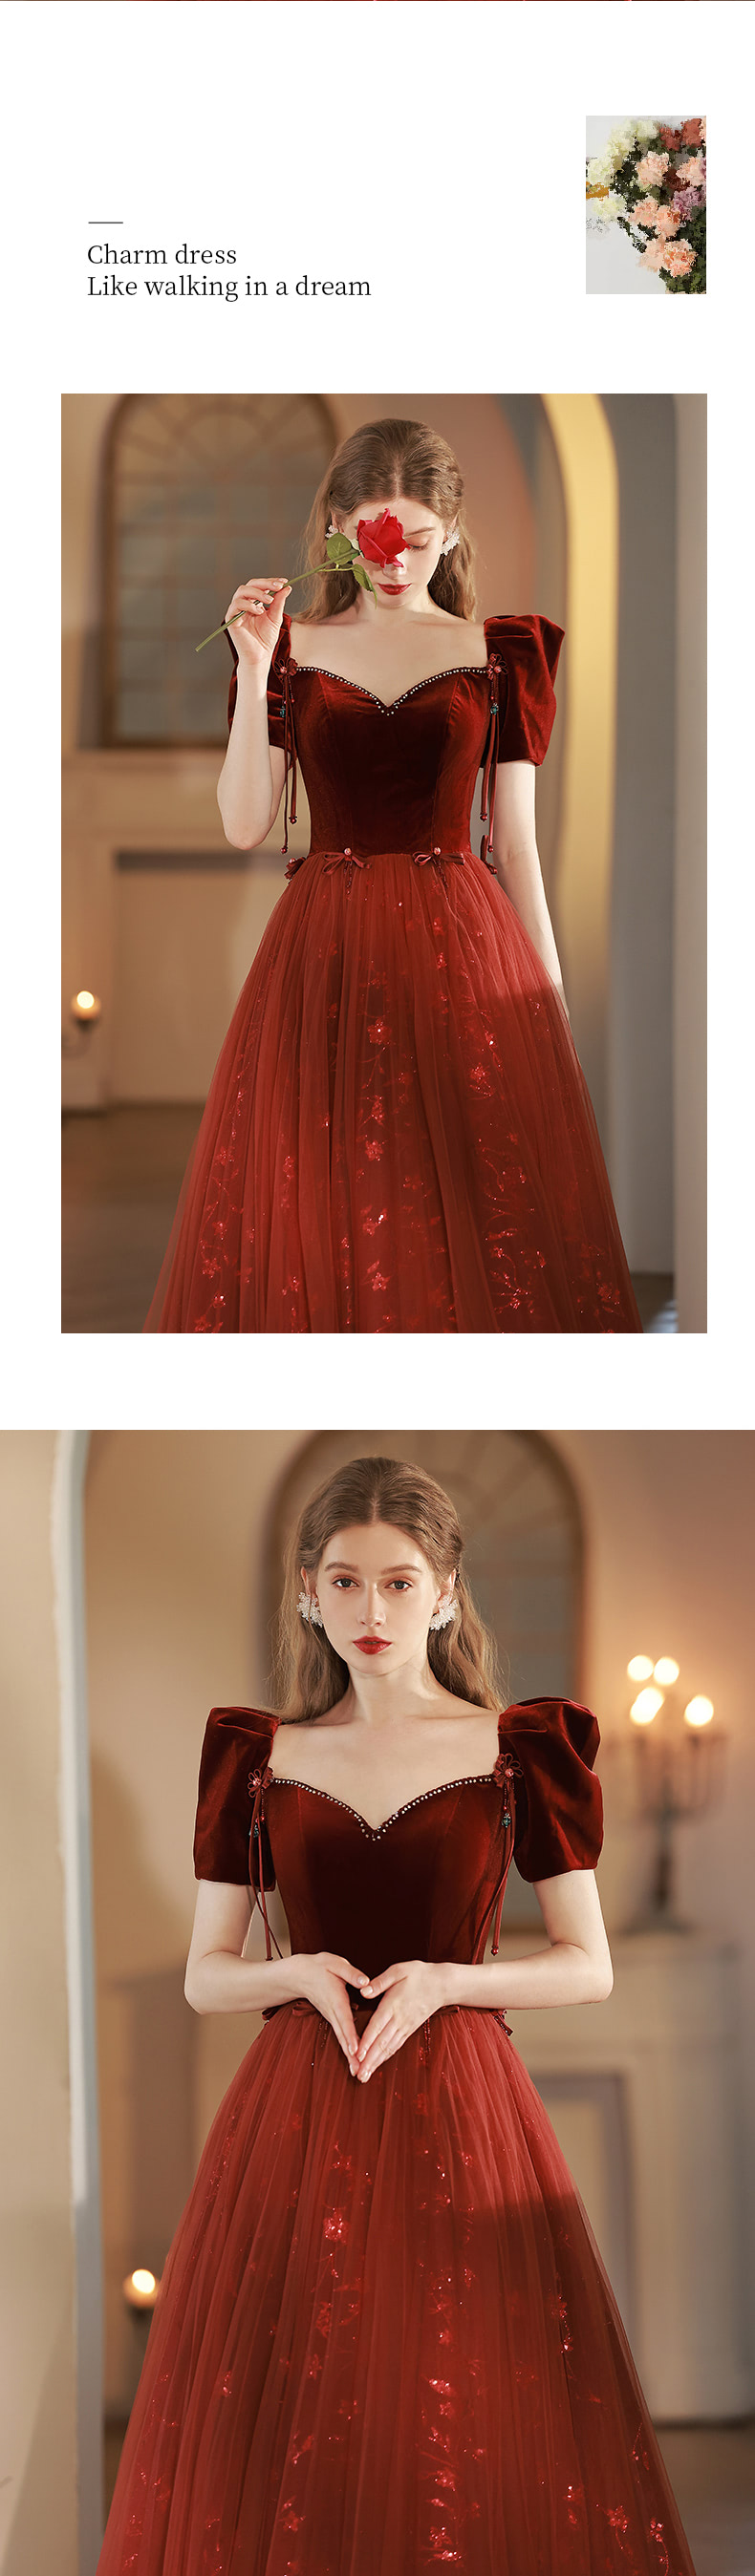 Vintage-Velvet-Embroidery-Evening-Party-Banquet-Long-Prom-Dress09.jpg